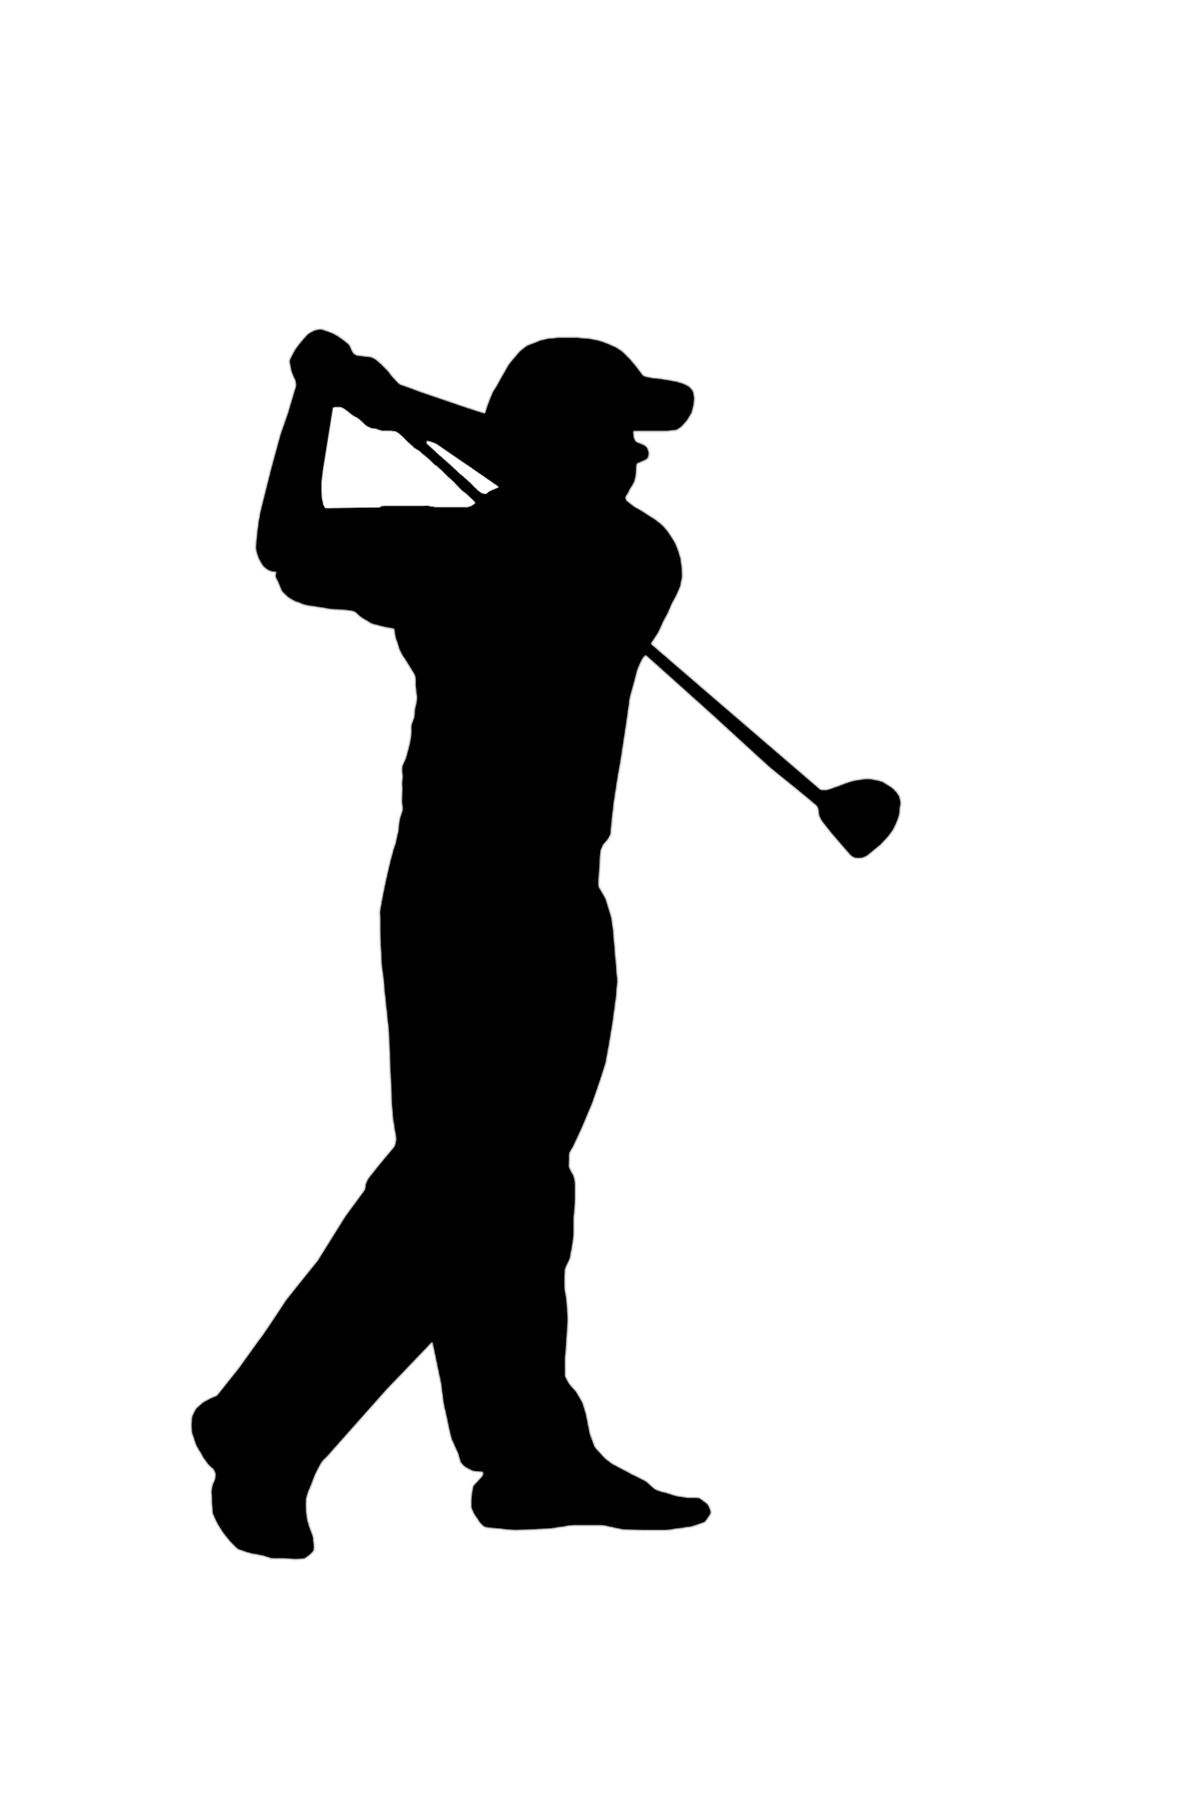 Image For > Golf Silhouette